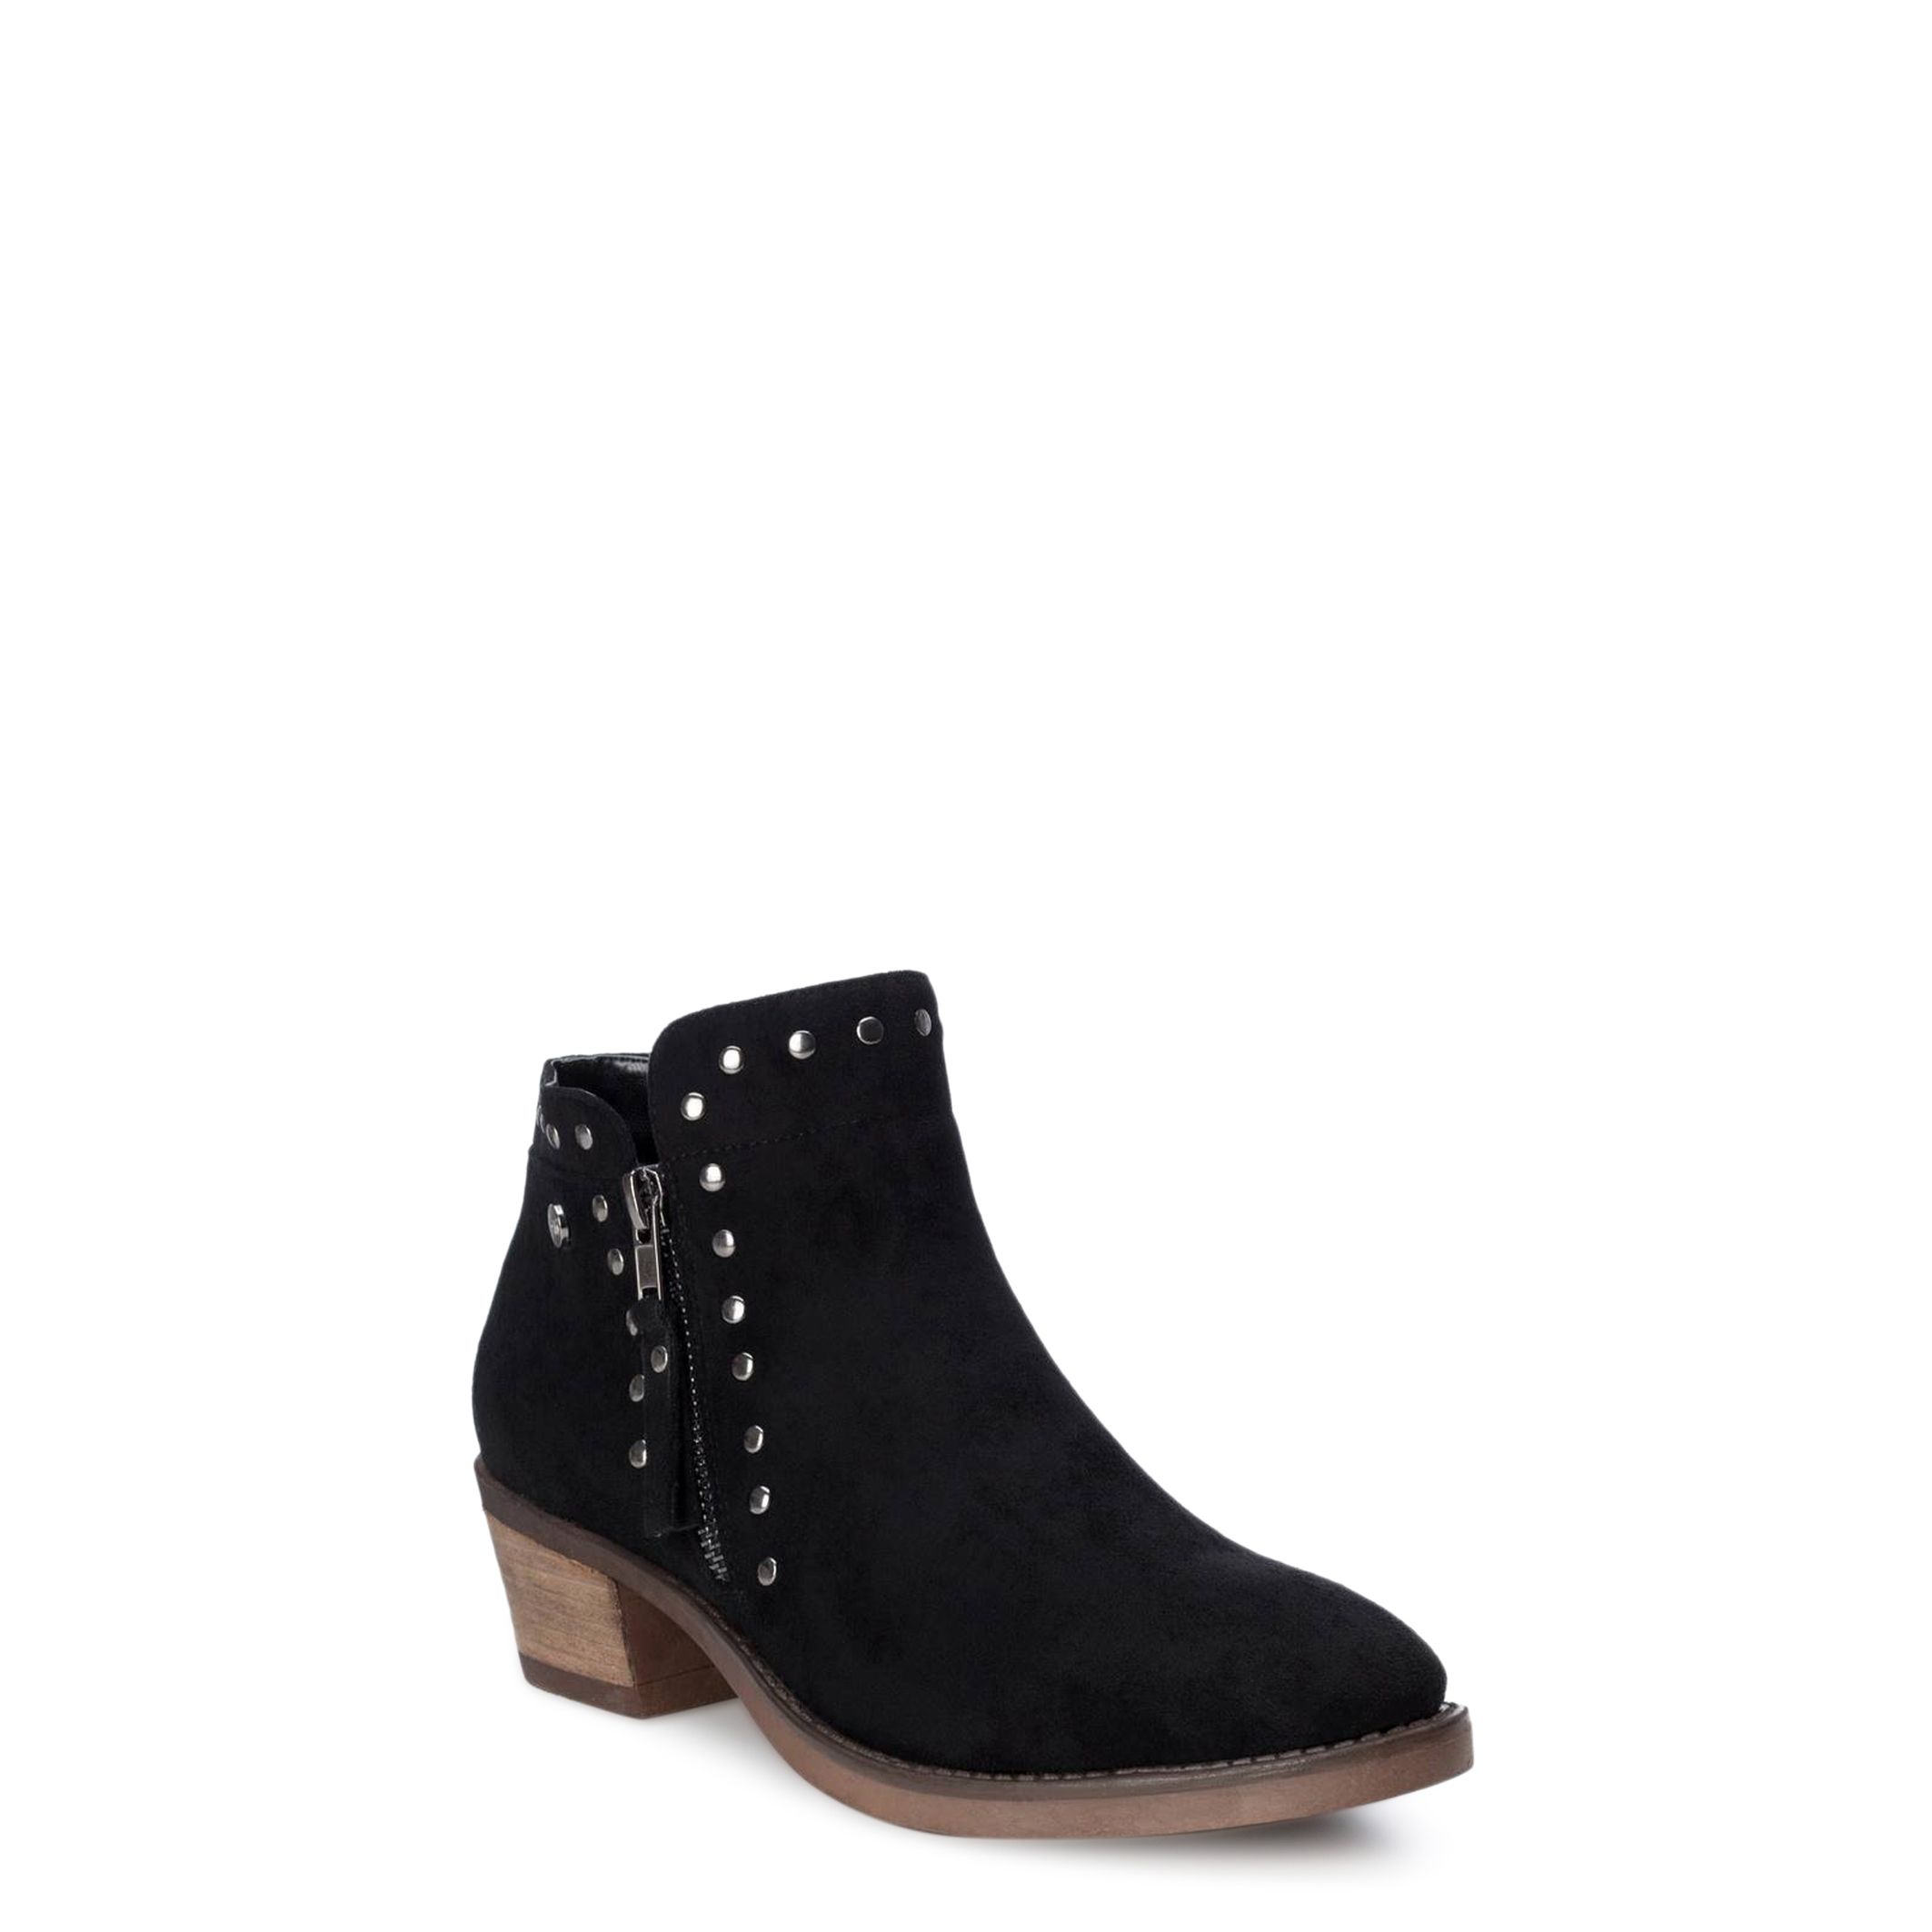 Collection: Fall/Winter <br> Gender: Woman <br> Type: Ankle boots <br> Upper: synthetic suede, fabric <br> Internal lining: synthetic material, fabric <br> Sole: rubber <br> Heel height cm: 5 <br> Details: studs, pointed toe, side zip